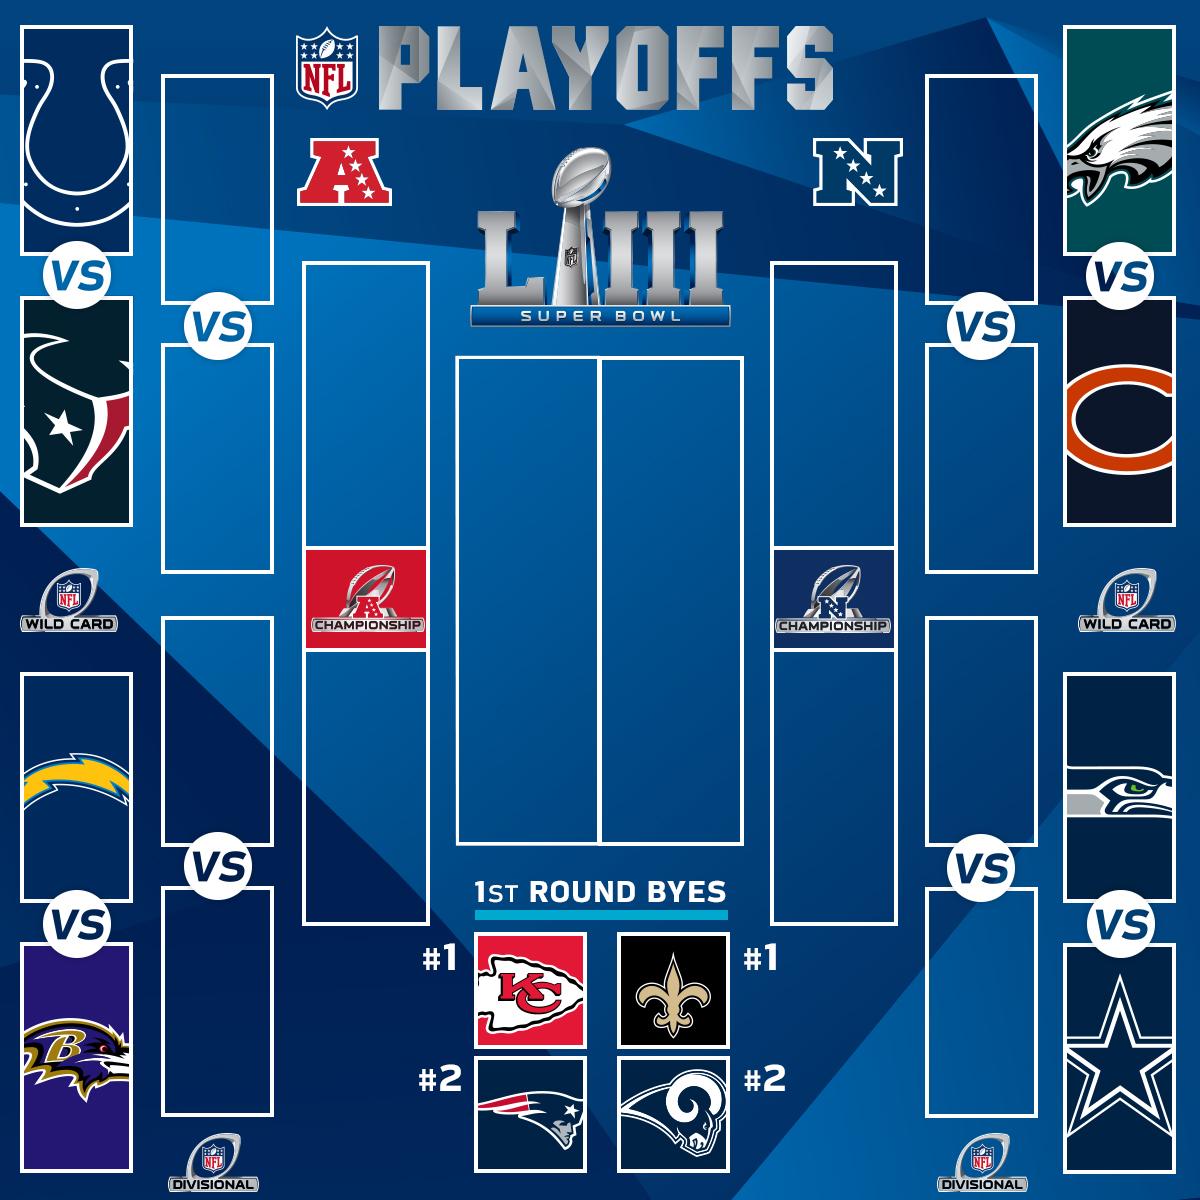 Updated look at NFC playoff picture after Week 17